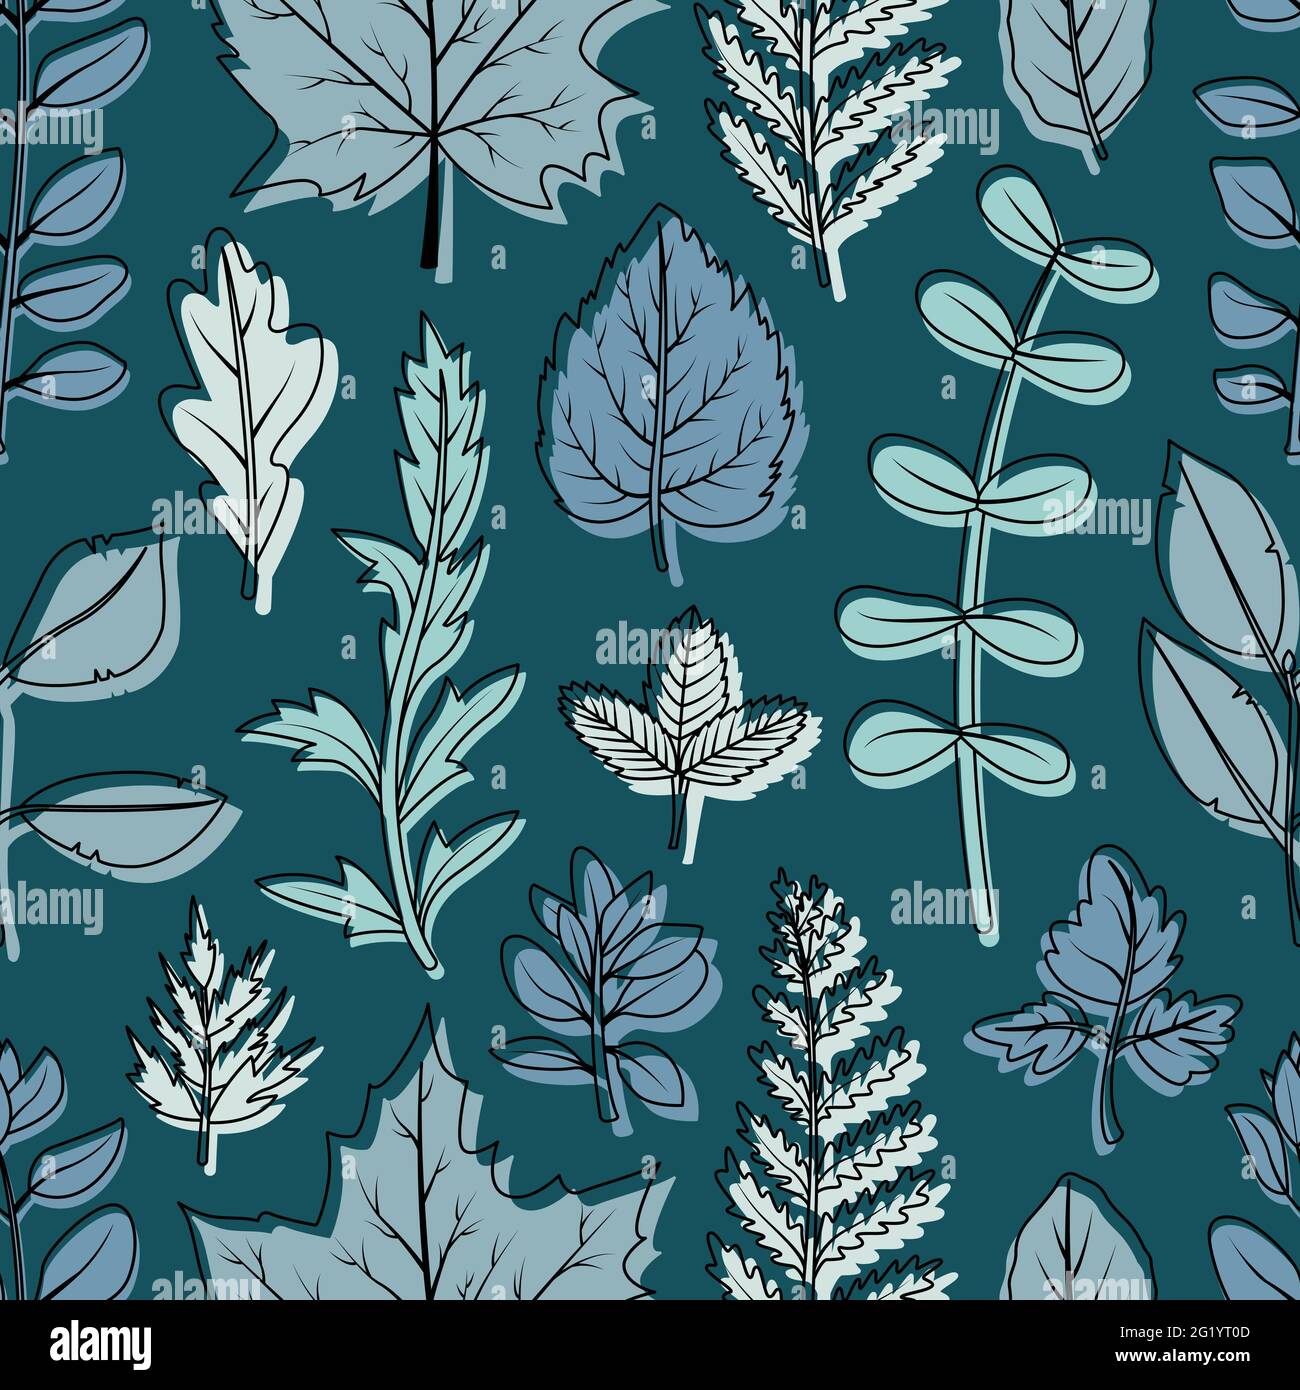 A seamless pattern of dried leaves and flowers for the herbarium. Stock Vector